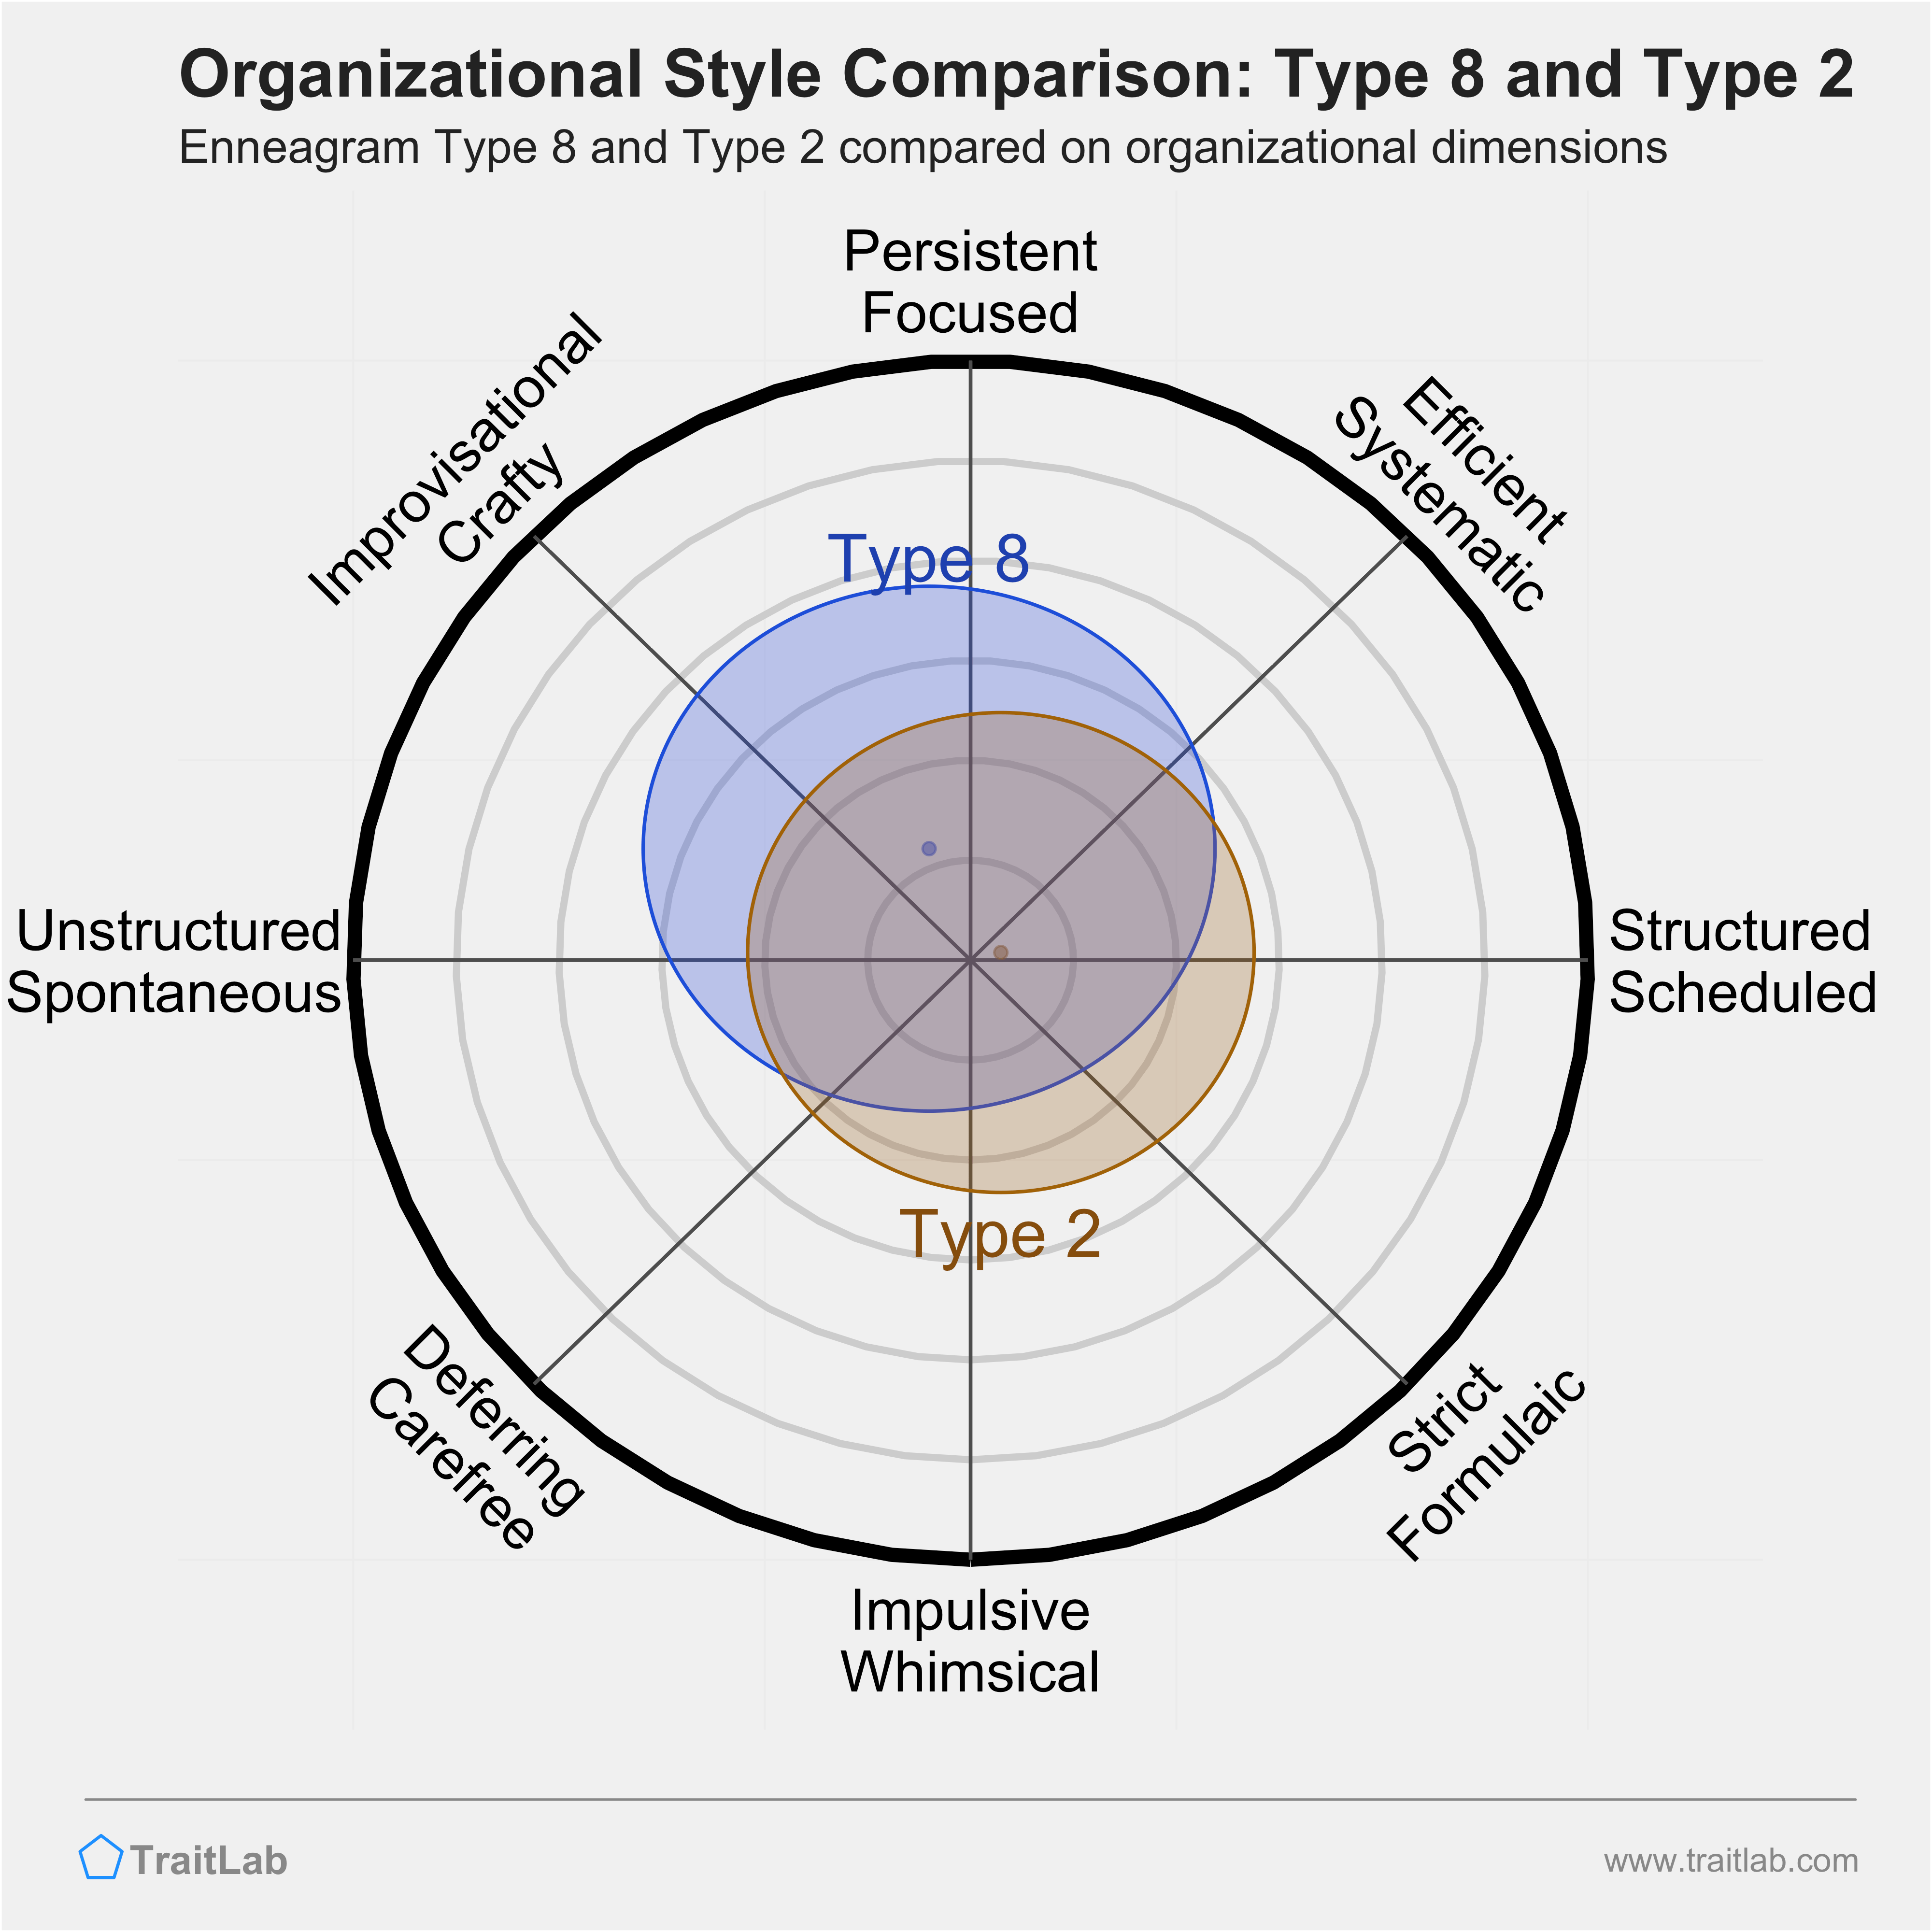 Type 8 and Type 2 comparison across organizational dimensions